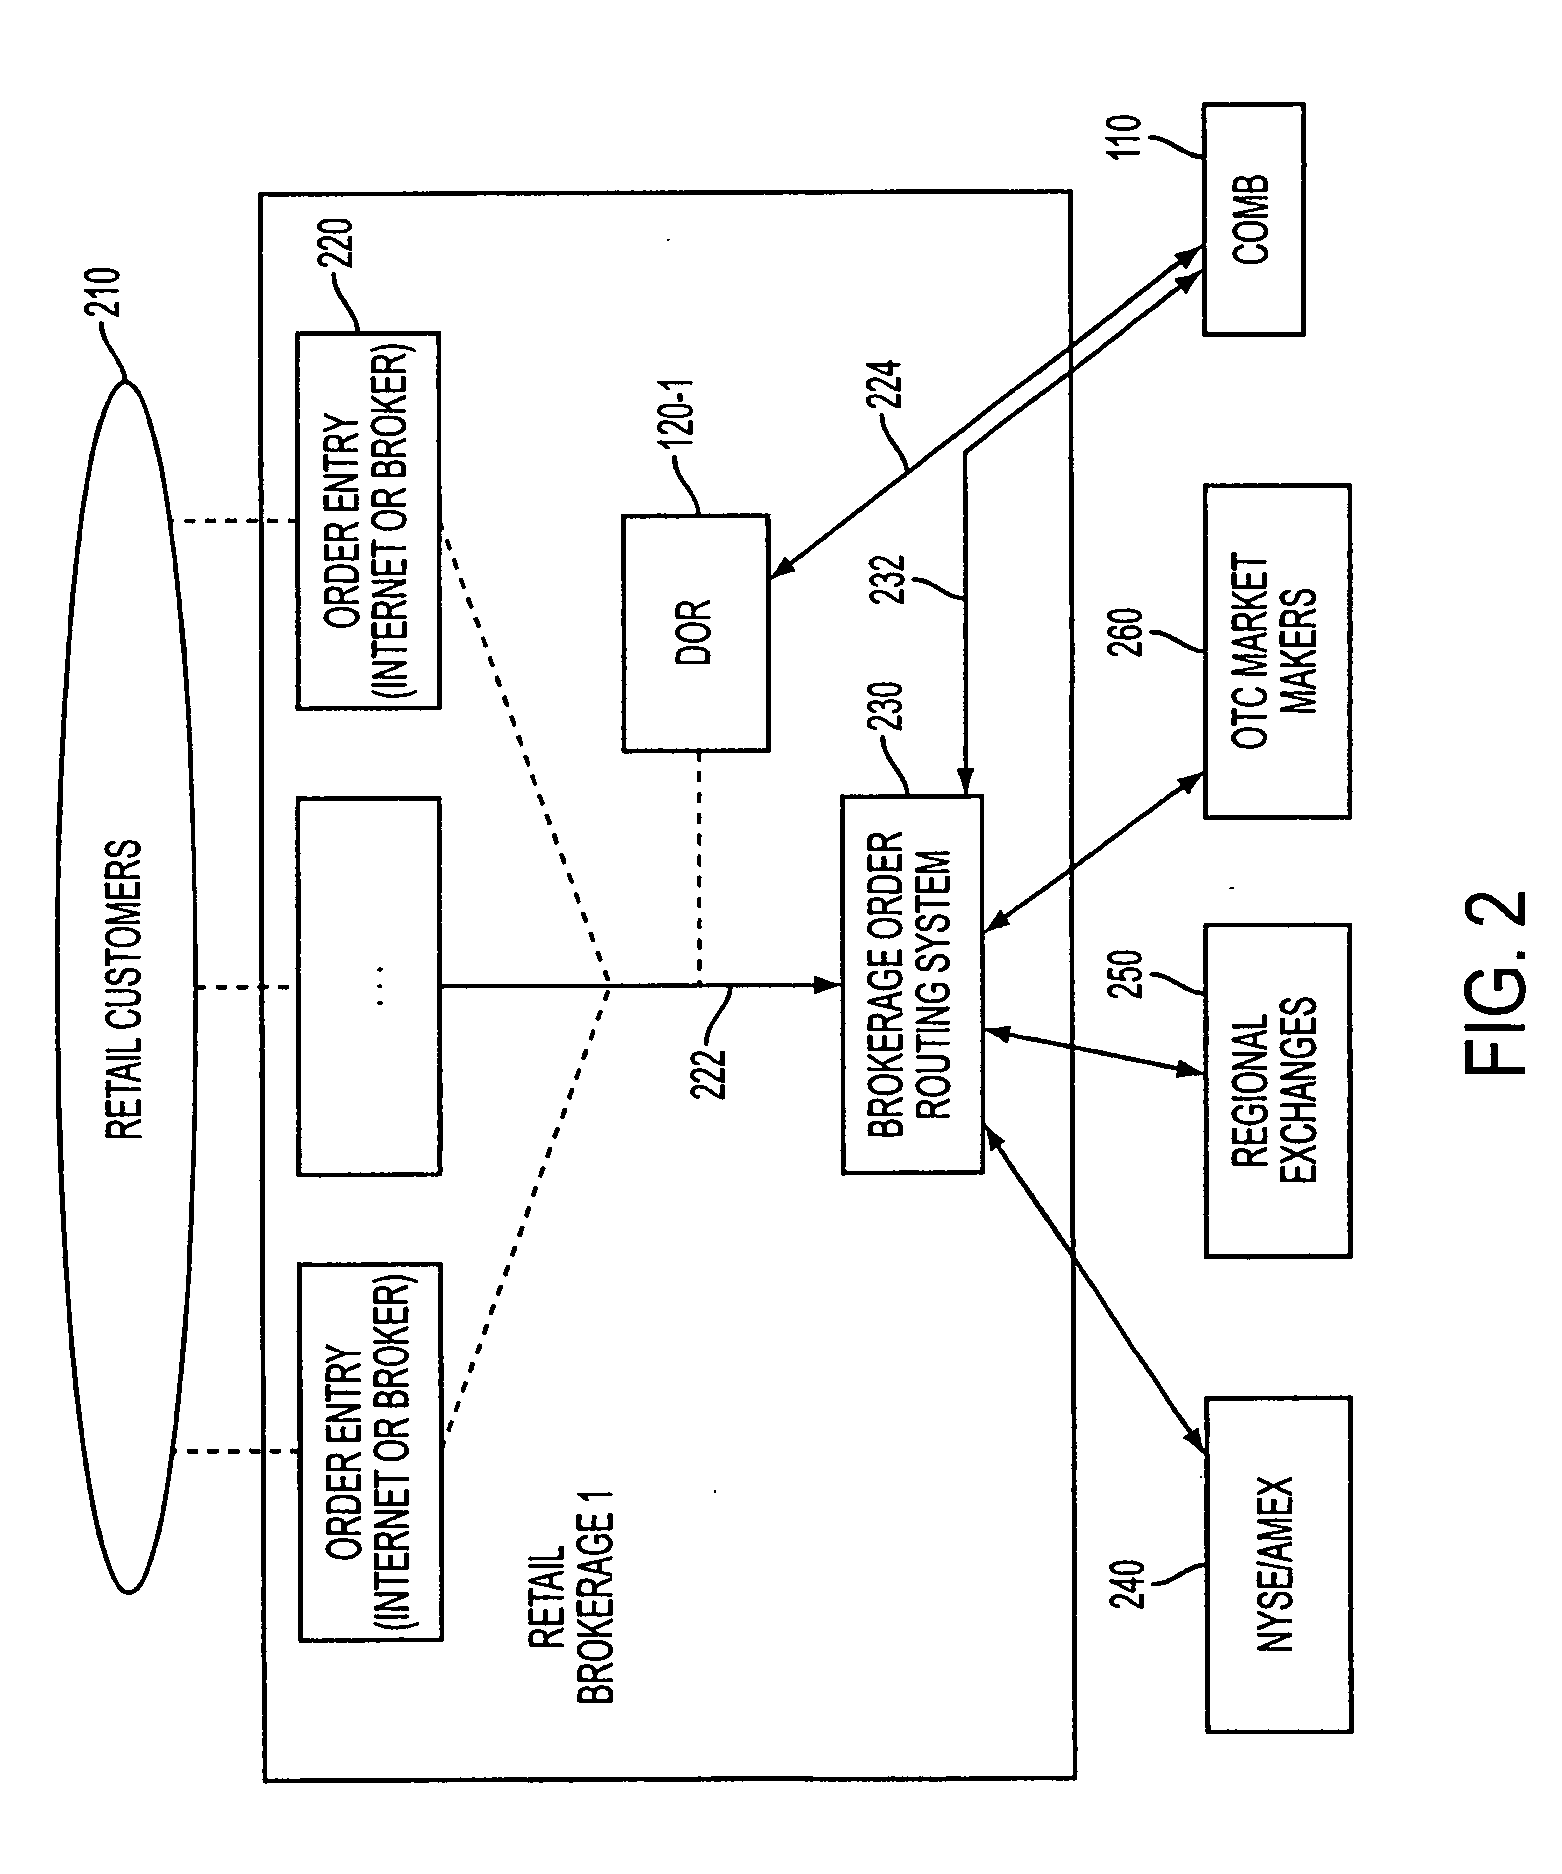 Method and system for facilitating automated interaction of marketable retail orders and professional trading interest at passively determined prices